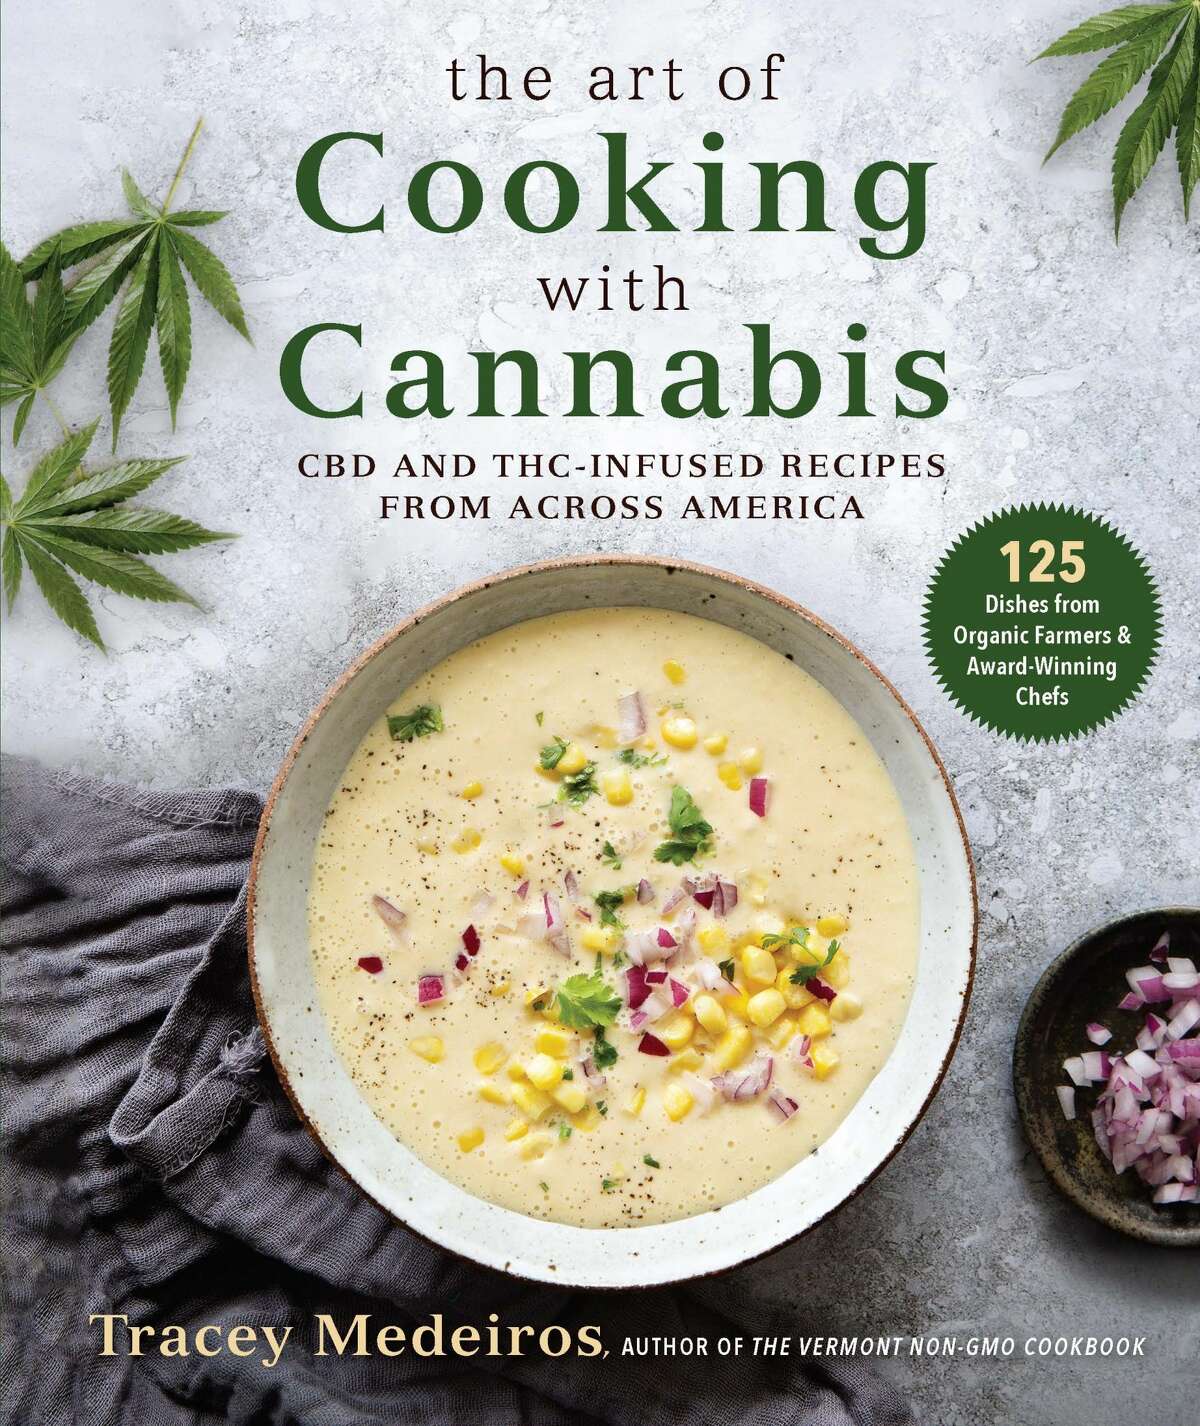 Tracey Medeiros’ new cookbook, “The Art of Cooking with Cannabis,” explores the culinary potential of the plant.